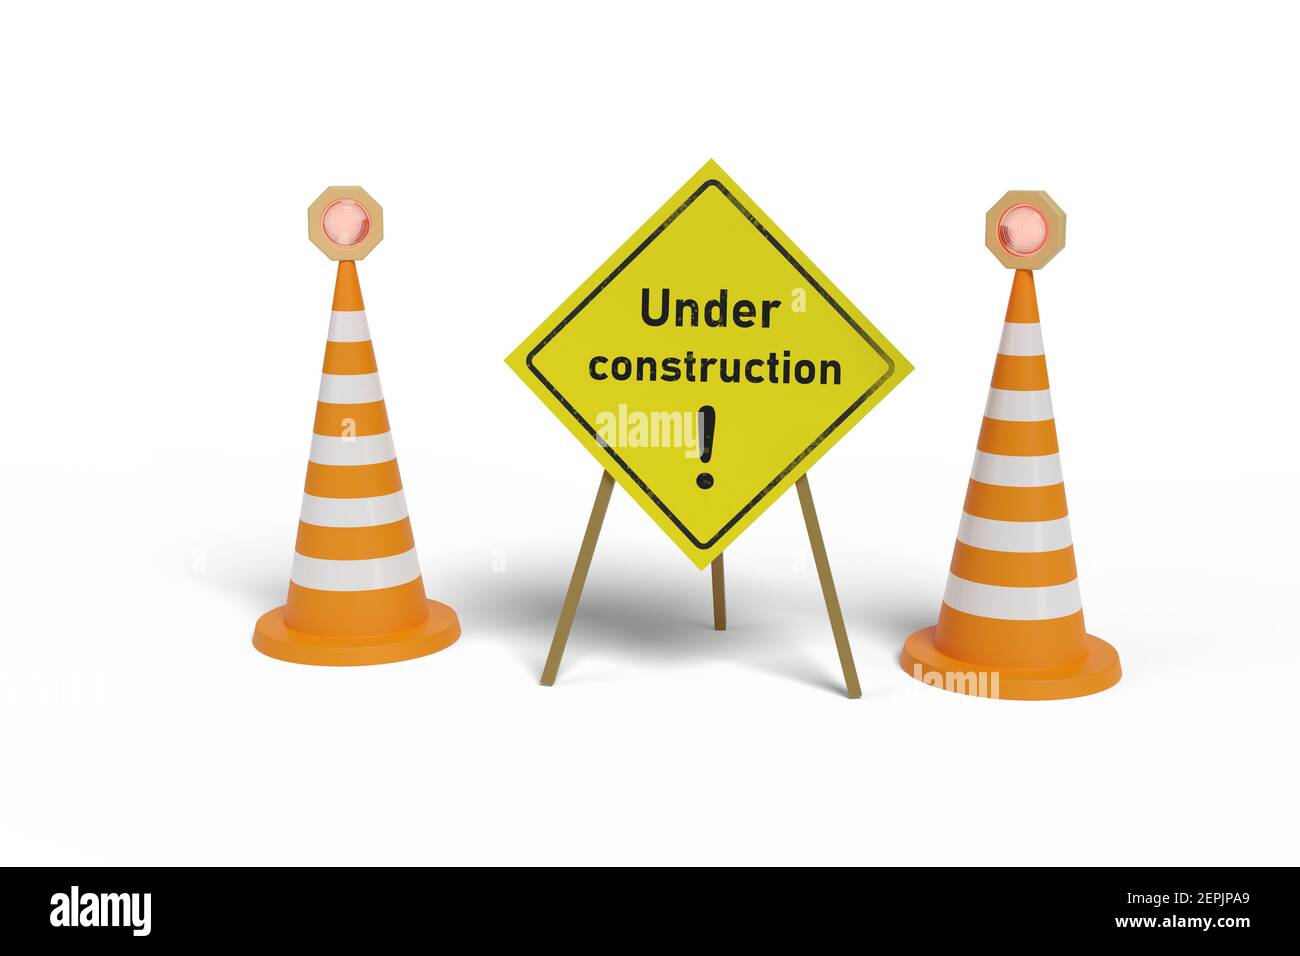 Sign with the text 'Under construction' next to two safety cones isolated on white background. 3d illustration. Stock Photo